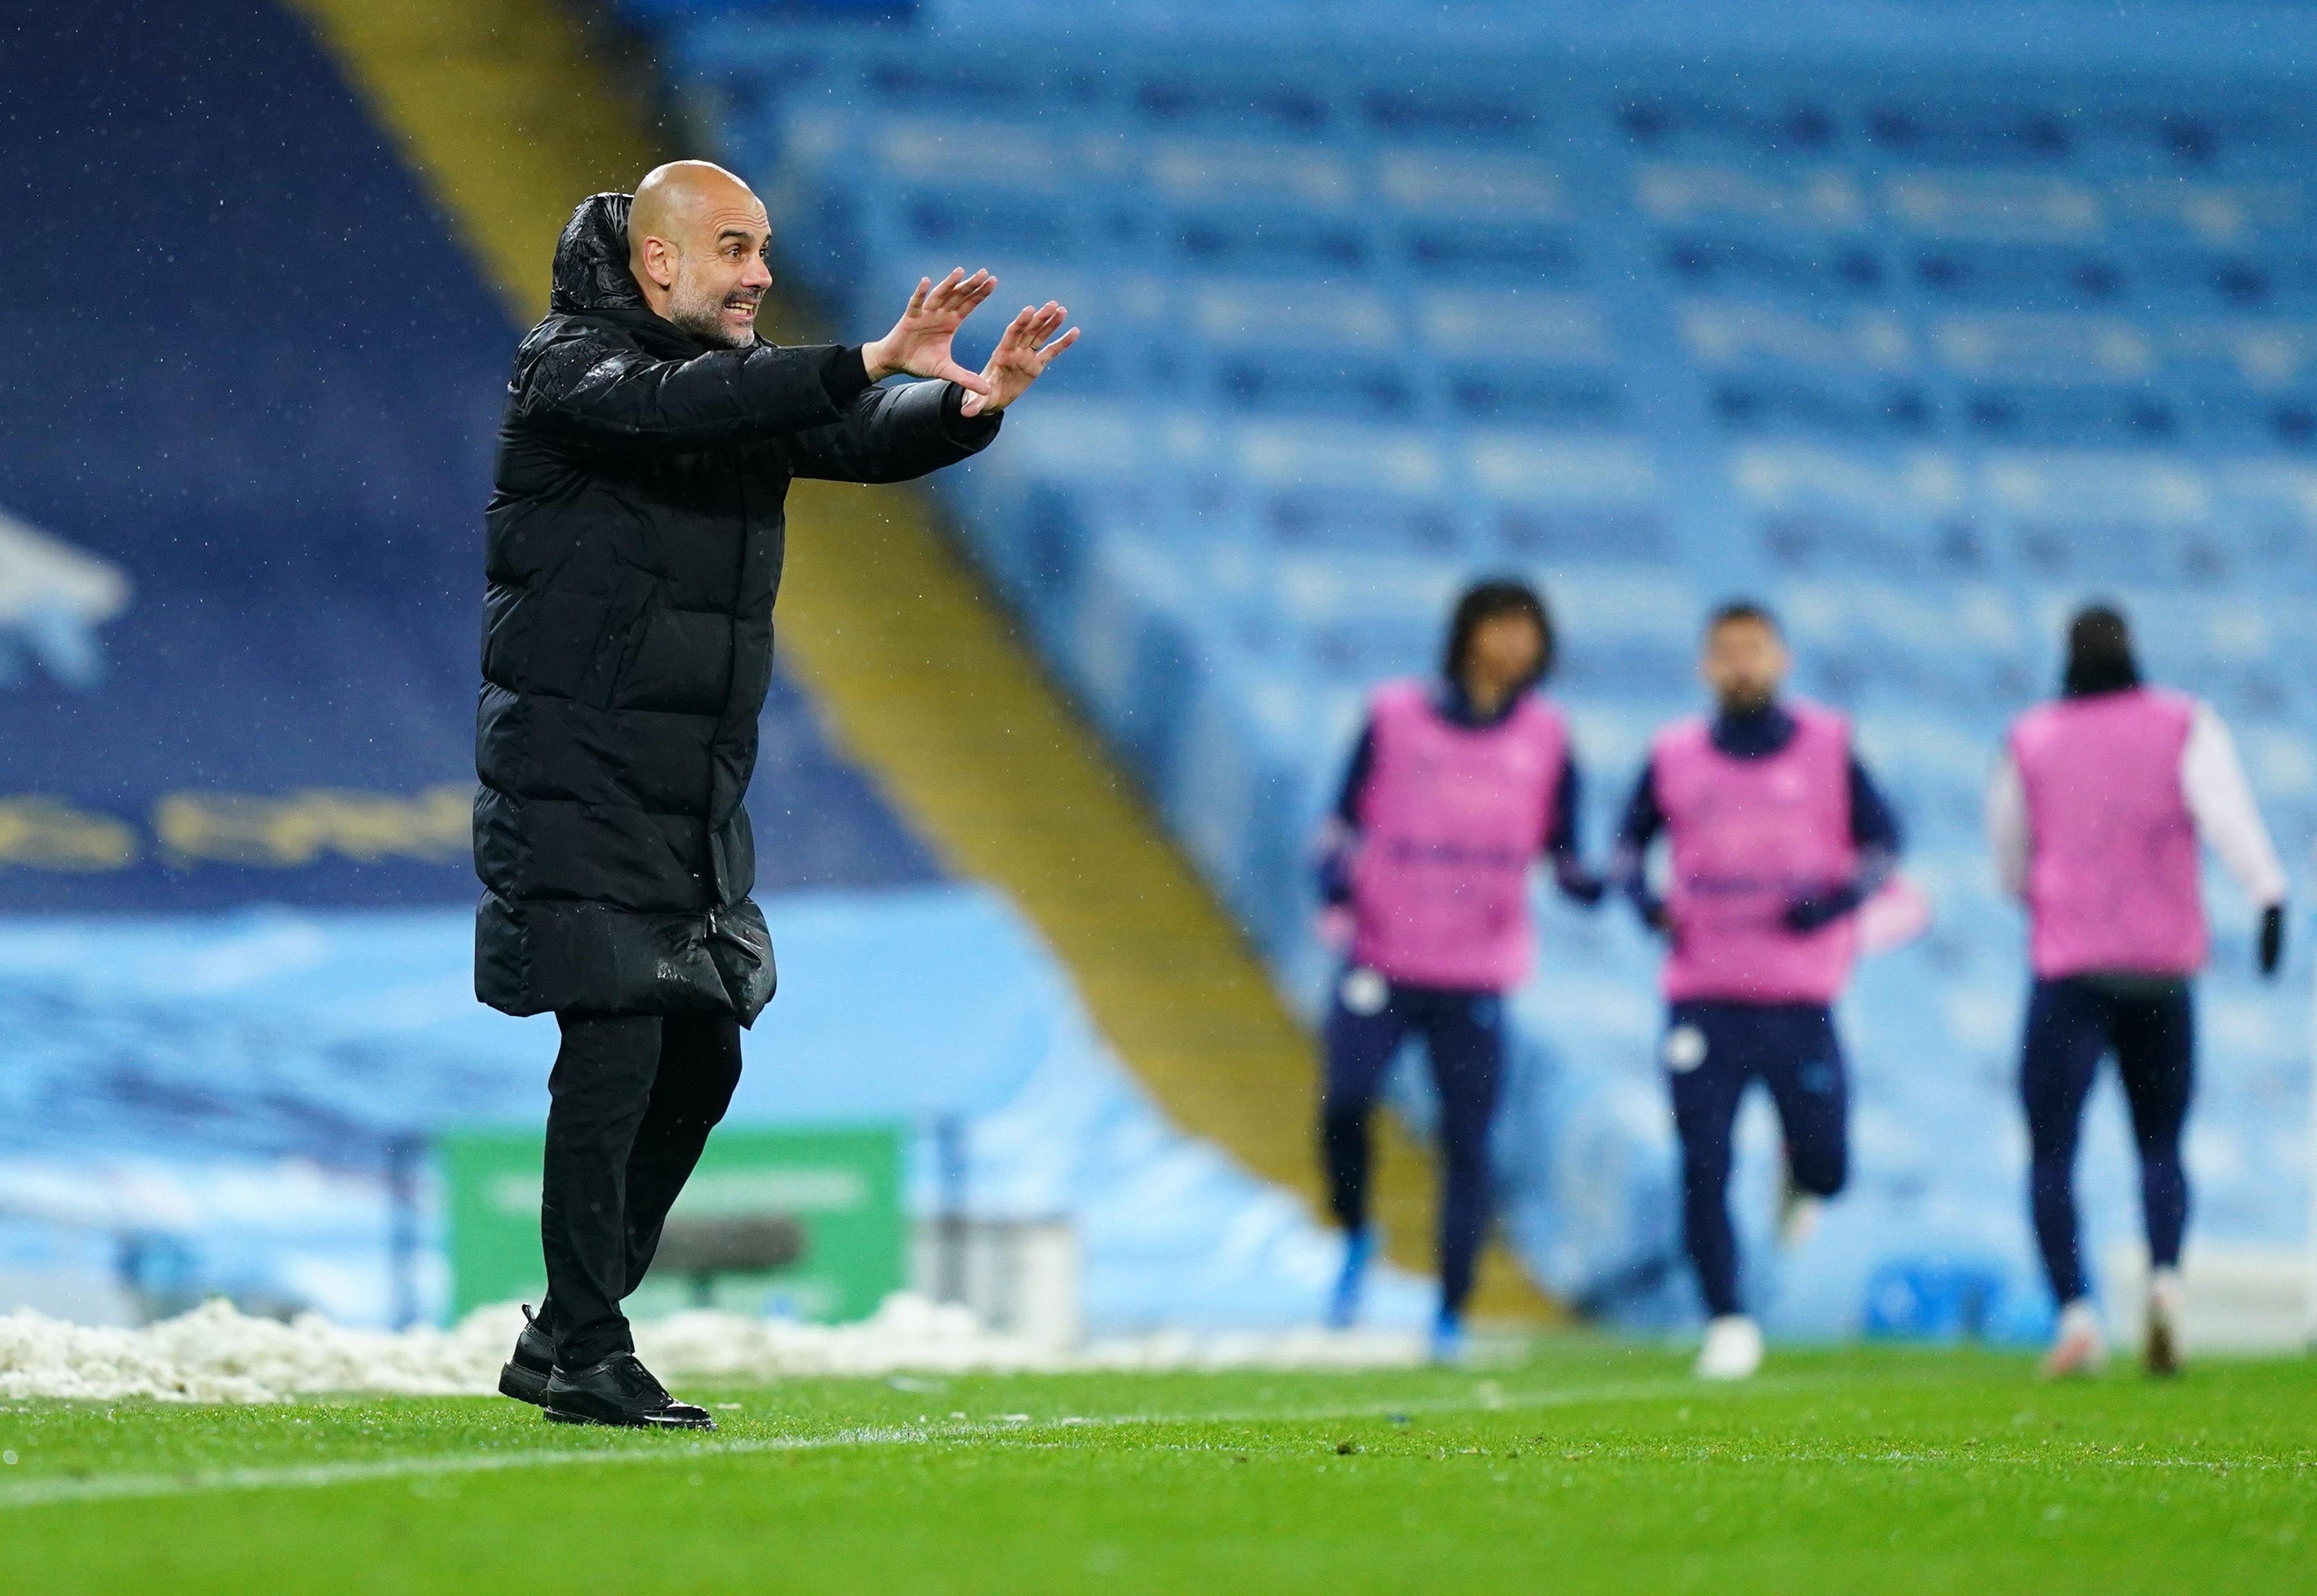 Pep Guardiola gives orders from the touchline